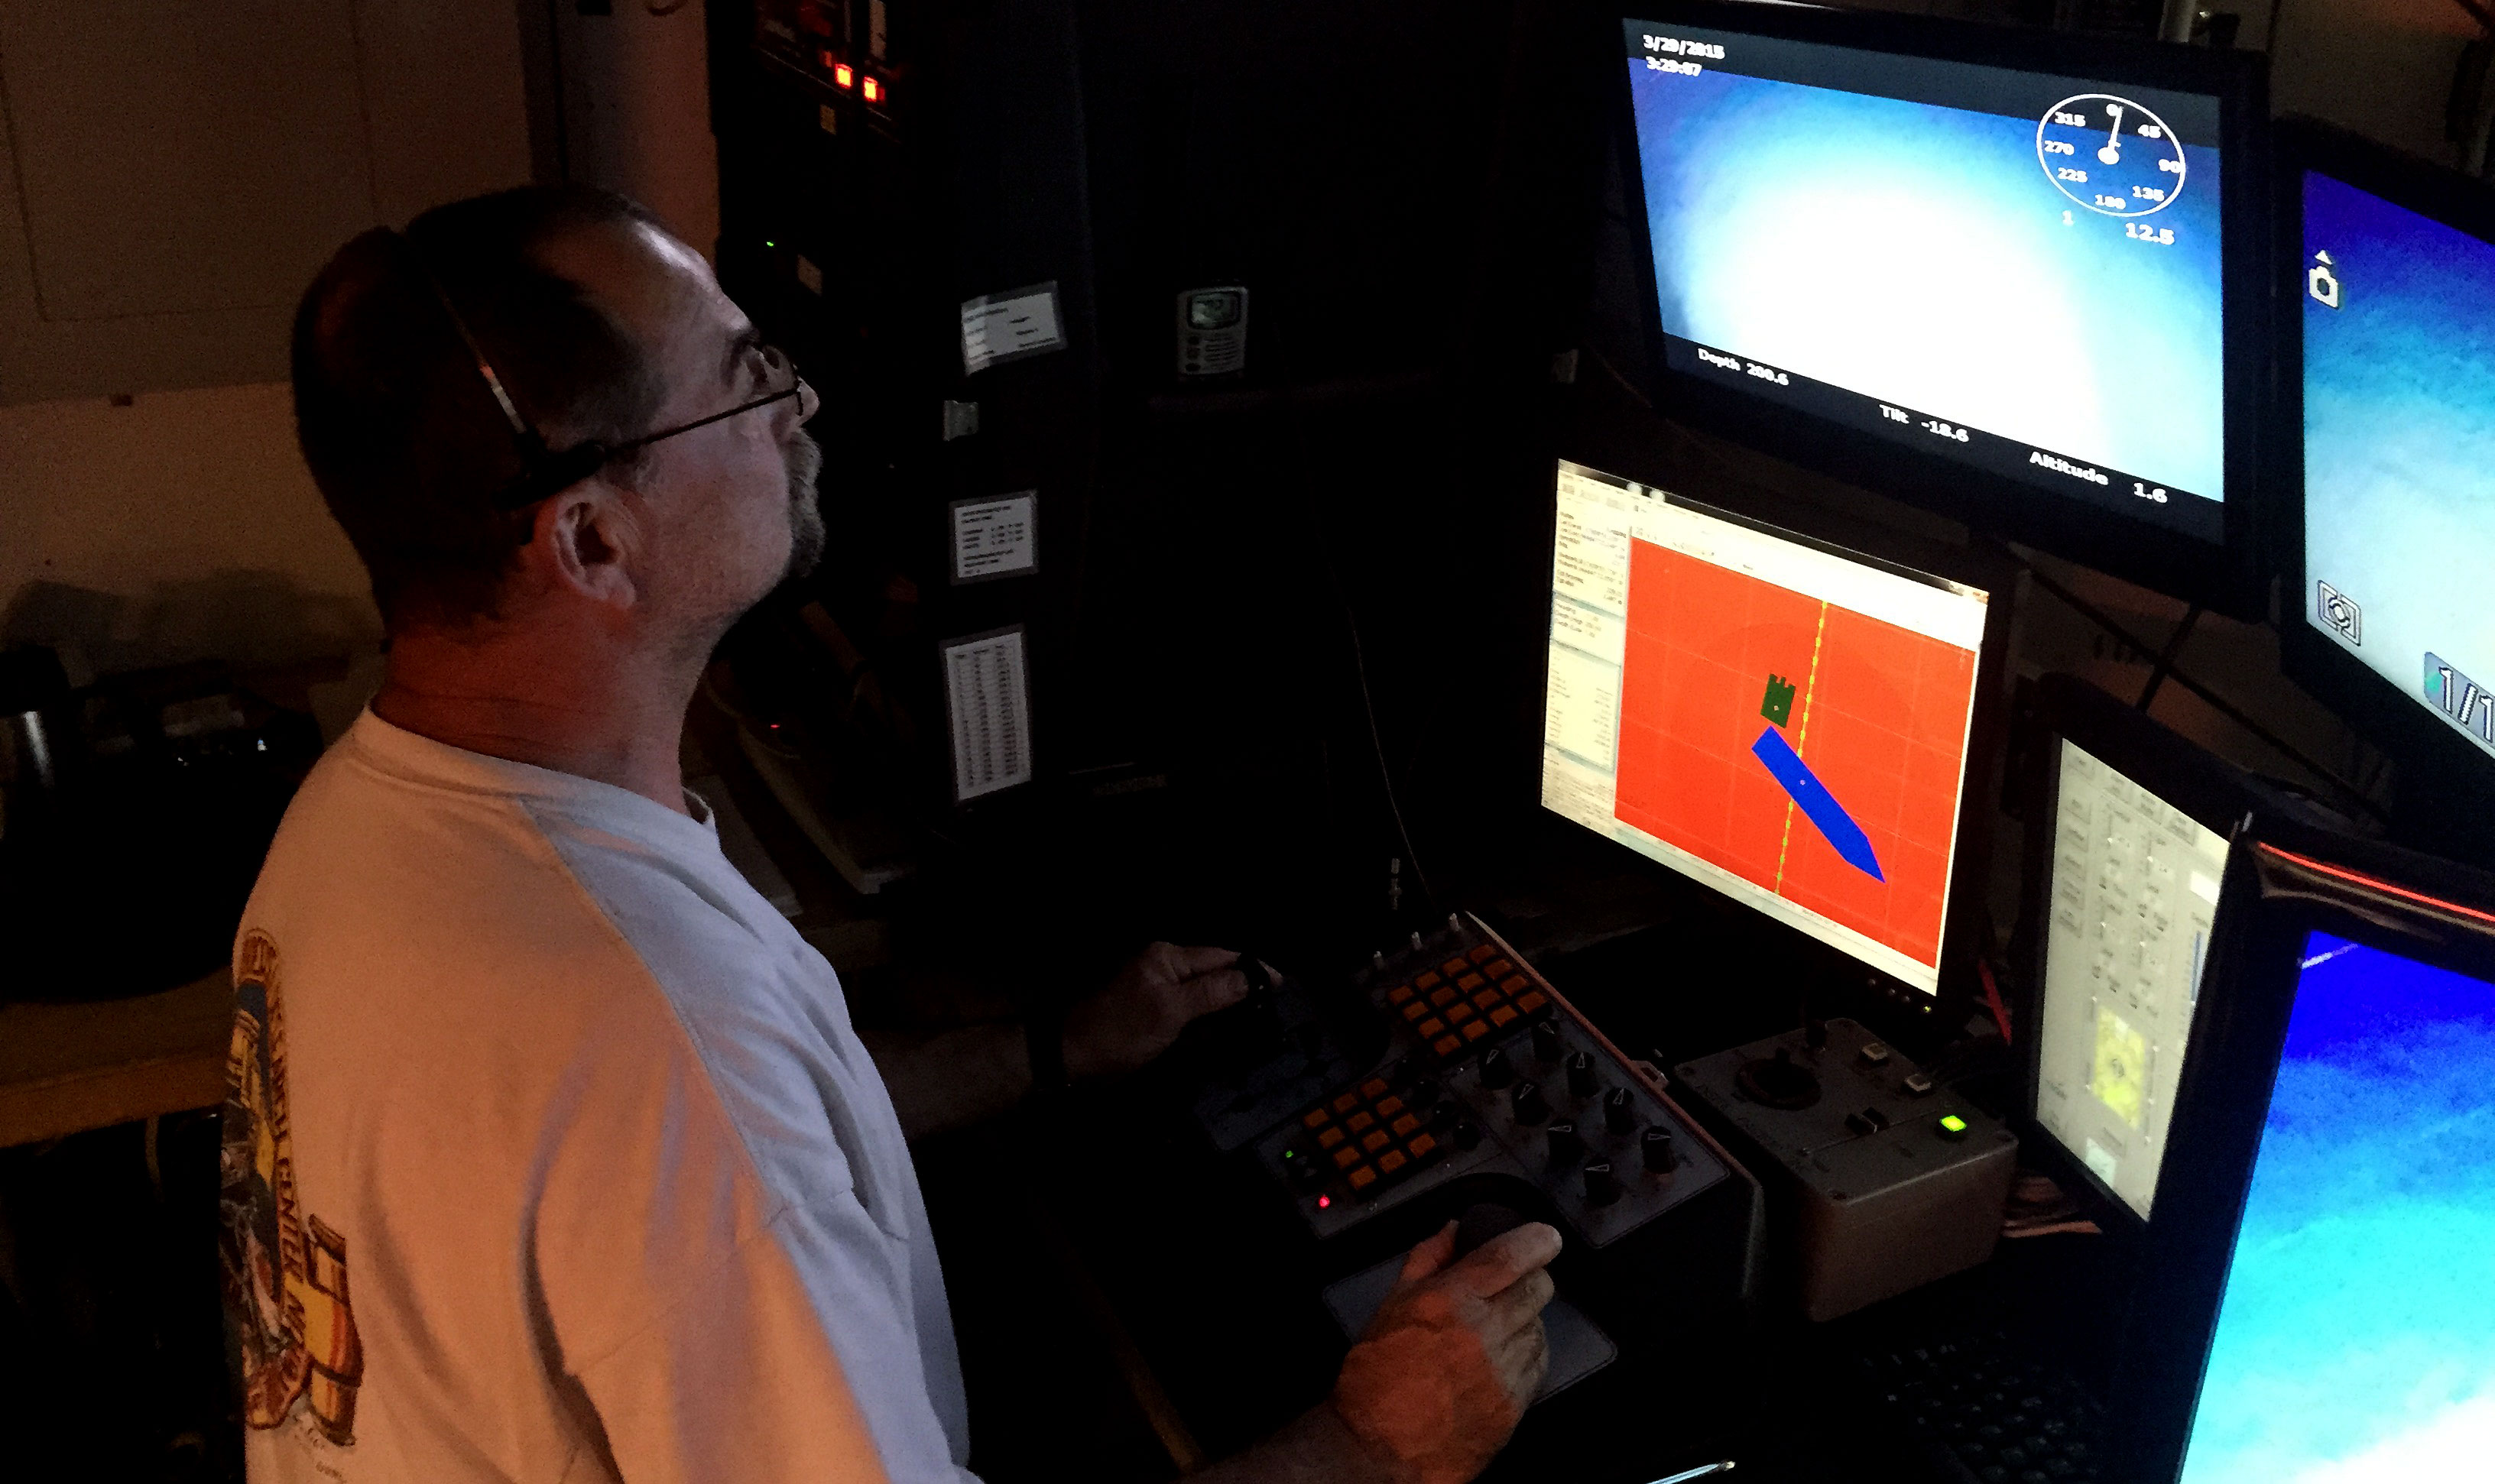 Once the ROV is safely away from the ship, ROV technician Lance Horn drives the ROV to the seafloor.